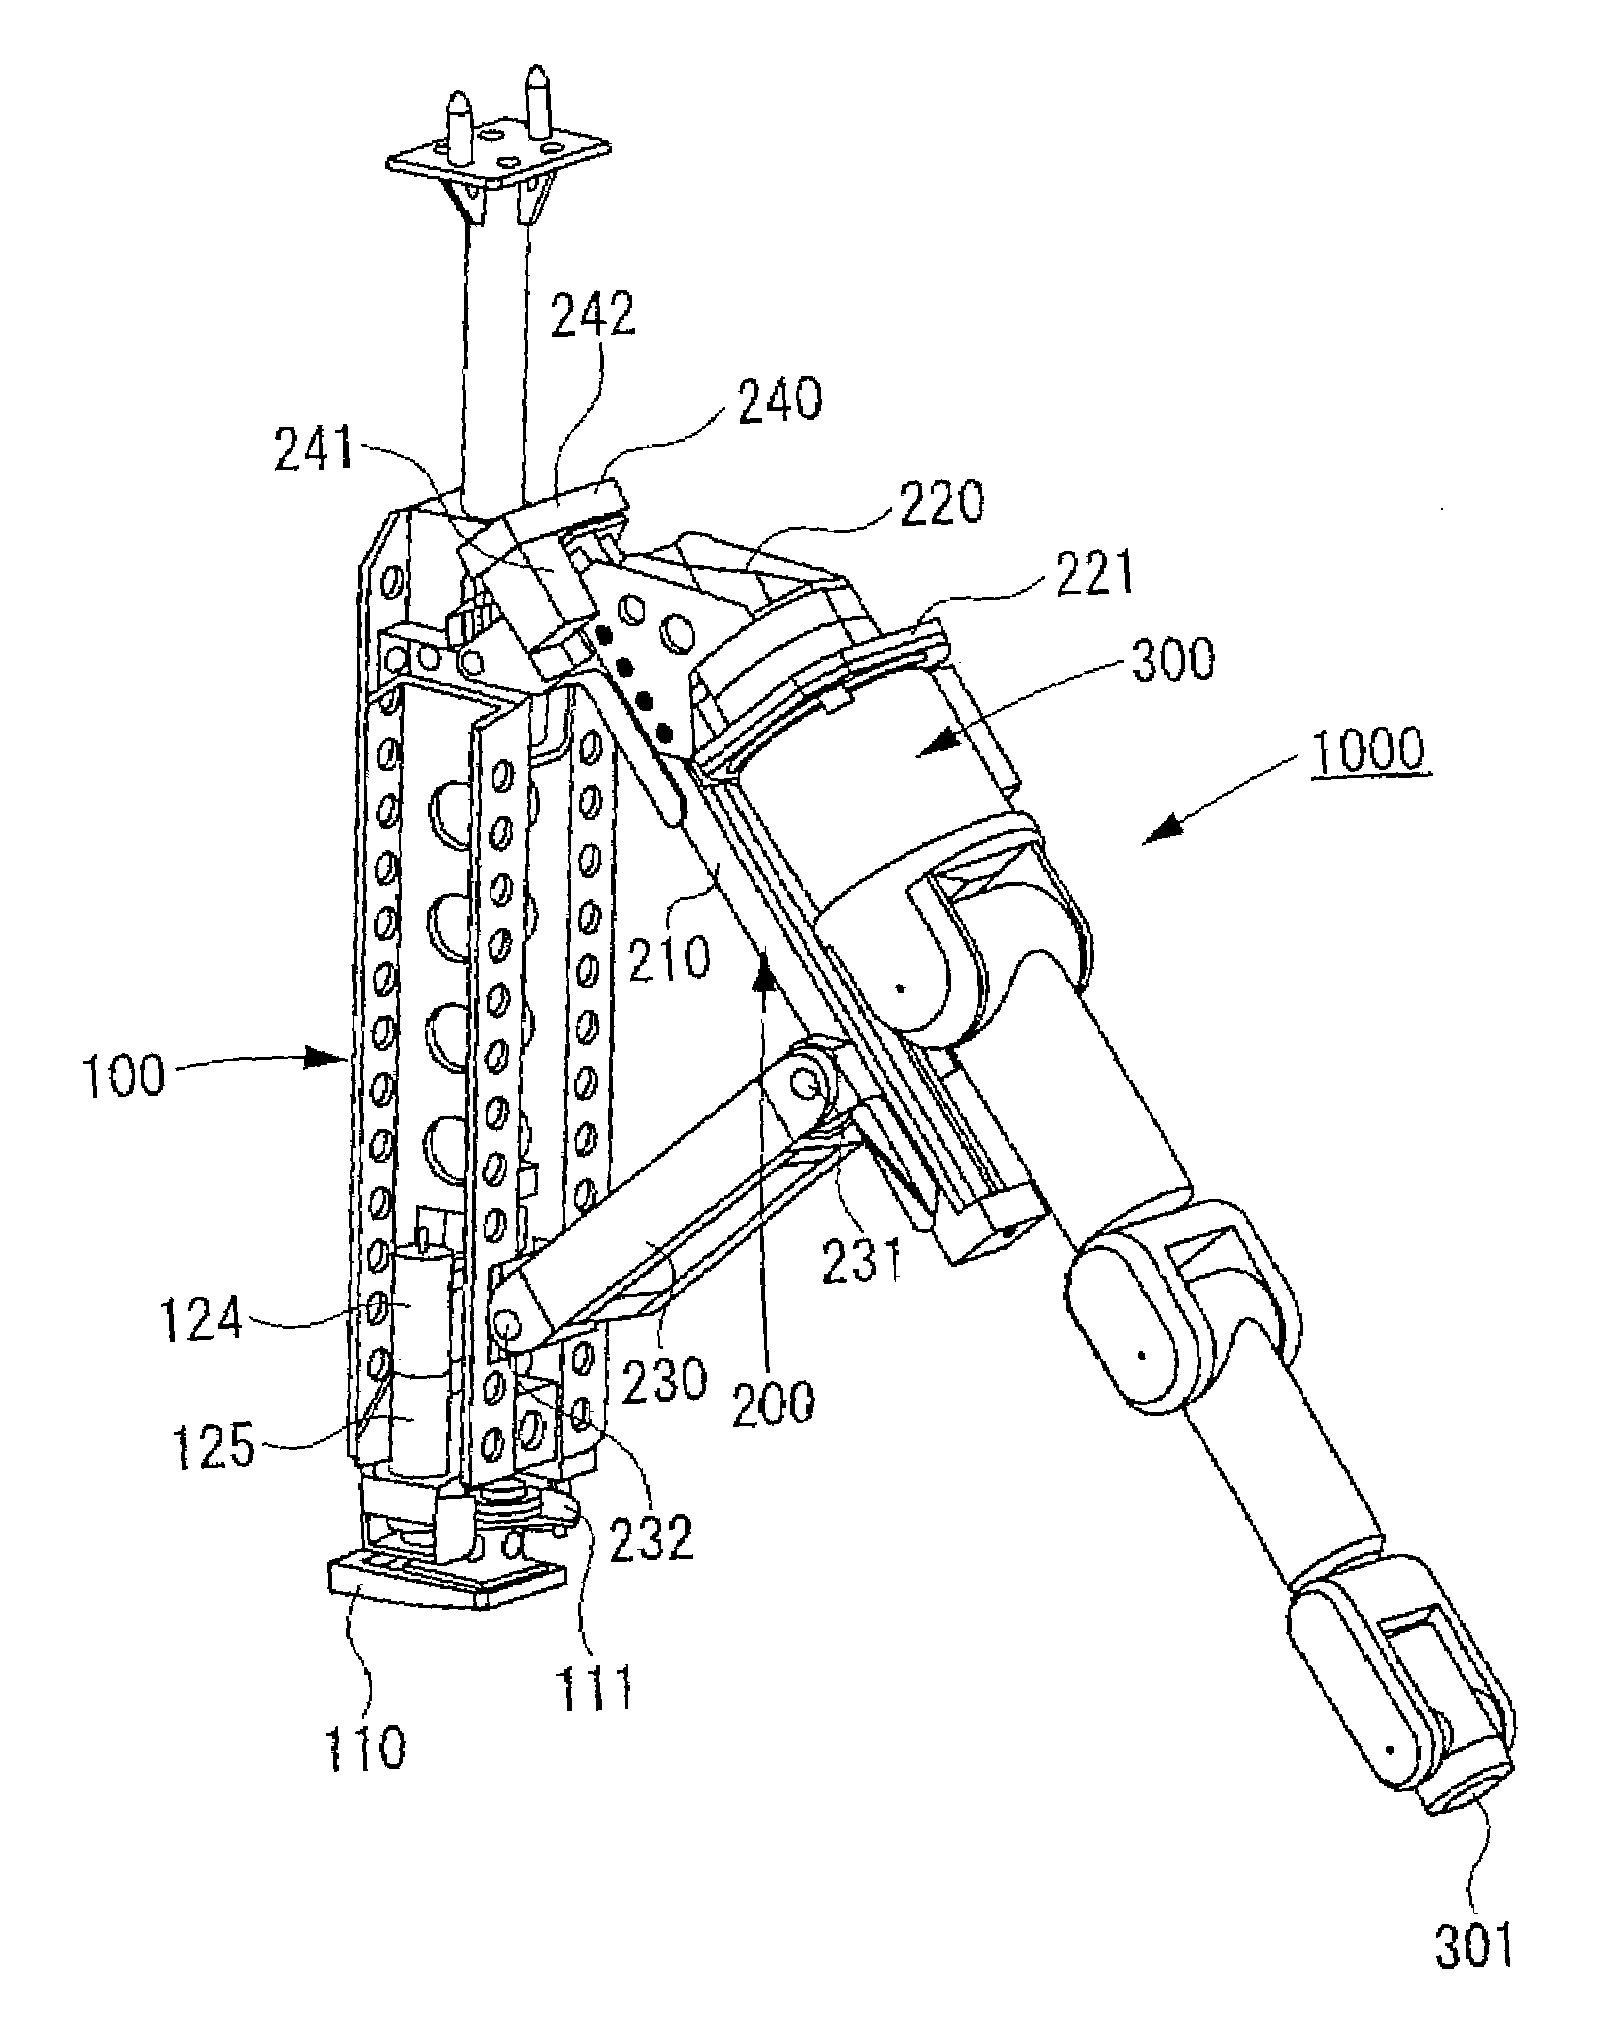 Tip tool guide apparatus and method for bringing in tip tool guide apparatus